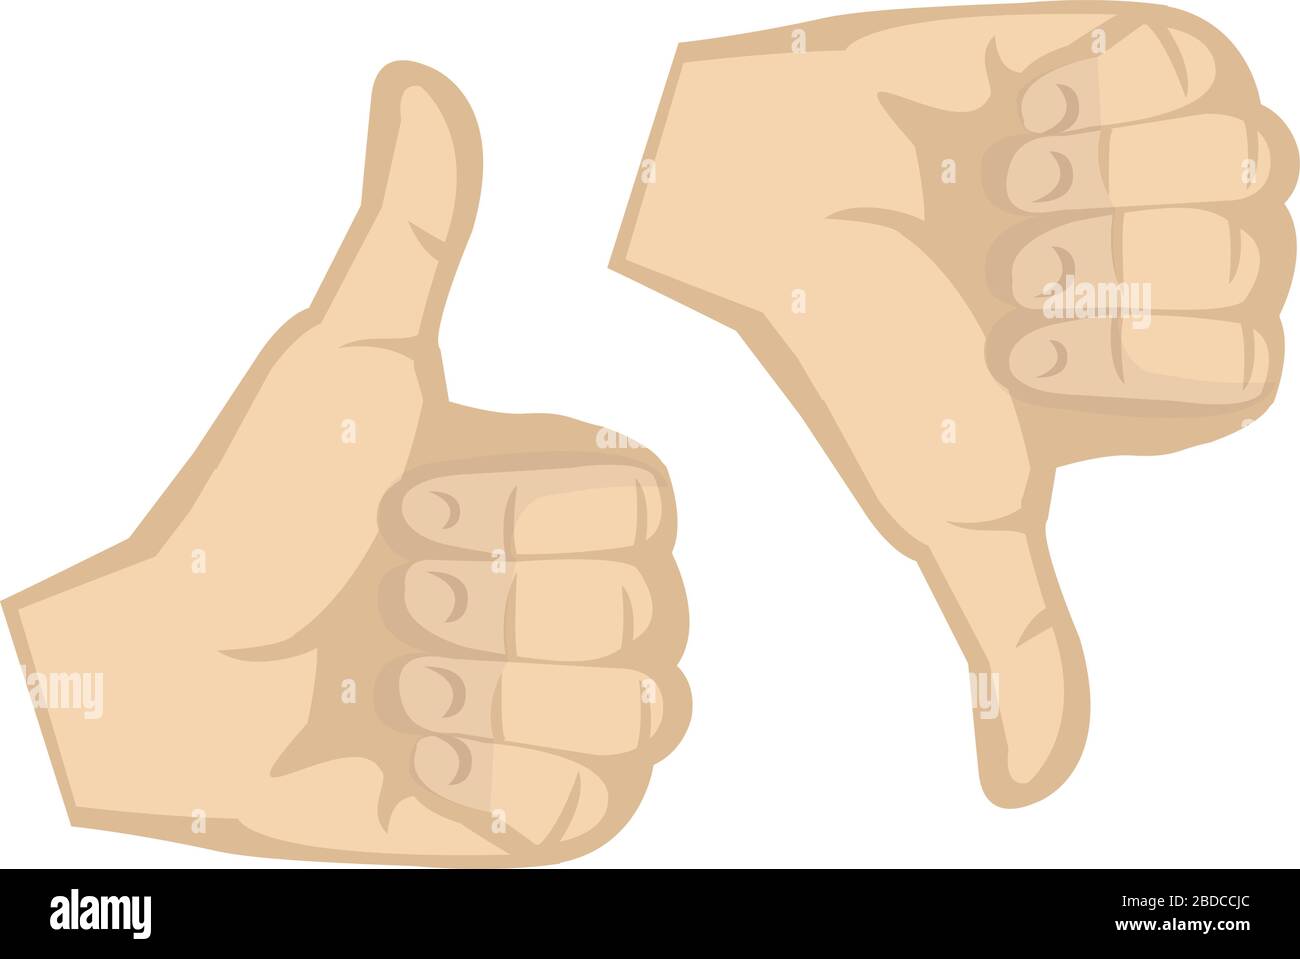 Thumbs up and thumbs down hand gesture isolated on white background. Stock Vector